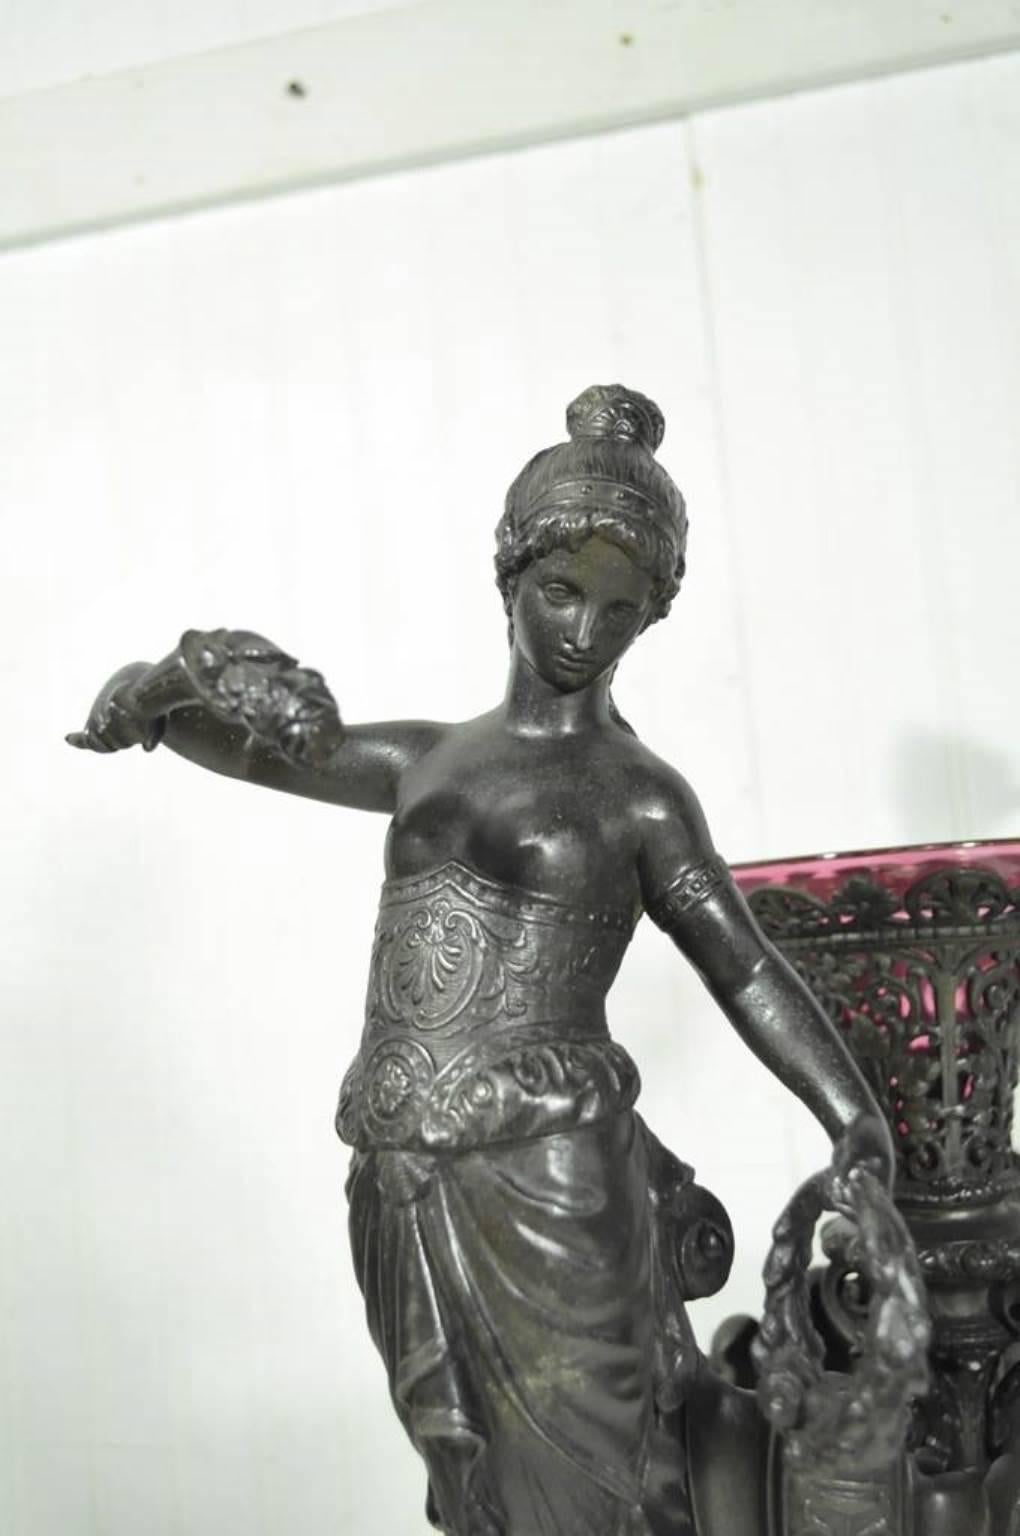 Antique Victorian spelter and marble figural mermaid centerpiece. Item features; black marble plinth, pinkish purple glass vase, two half-nude mermaid figures, finely cast metal details, substantial overall weight (approximate 32 lbs.)